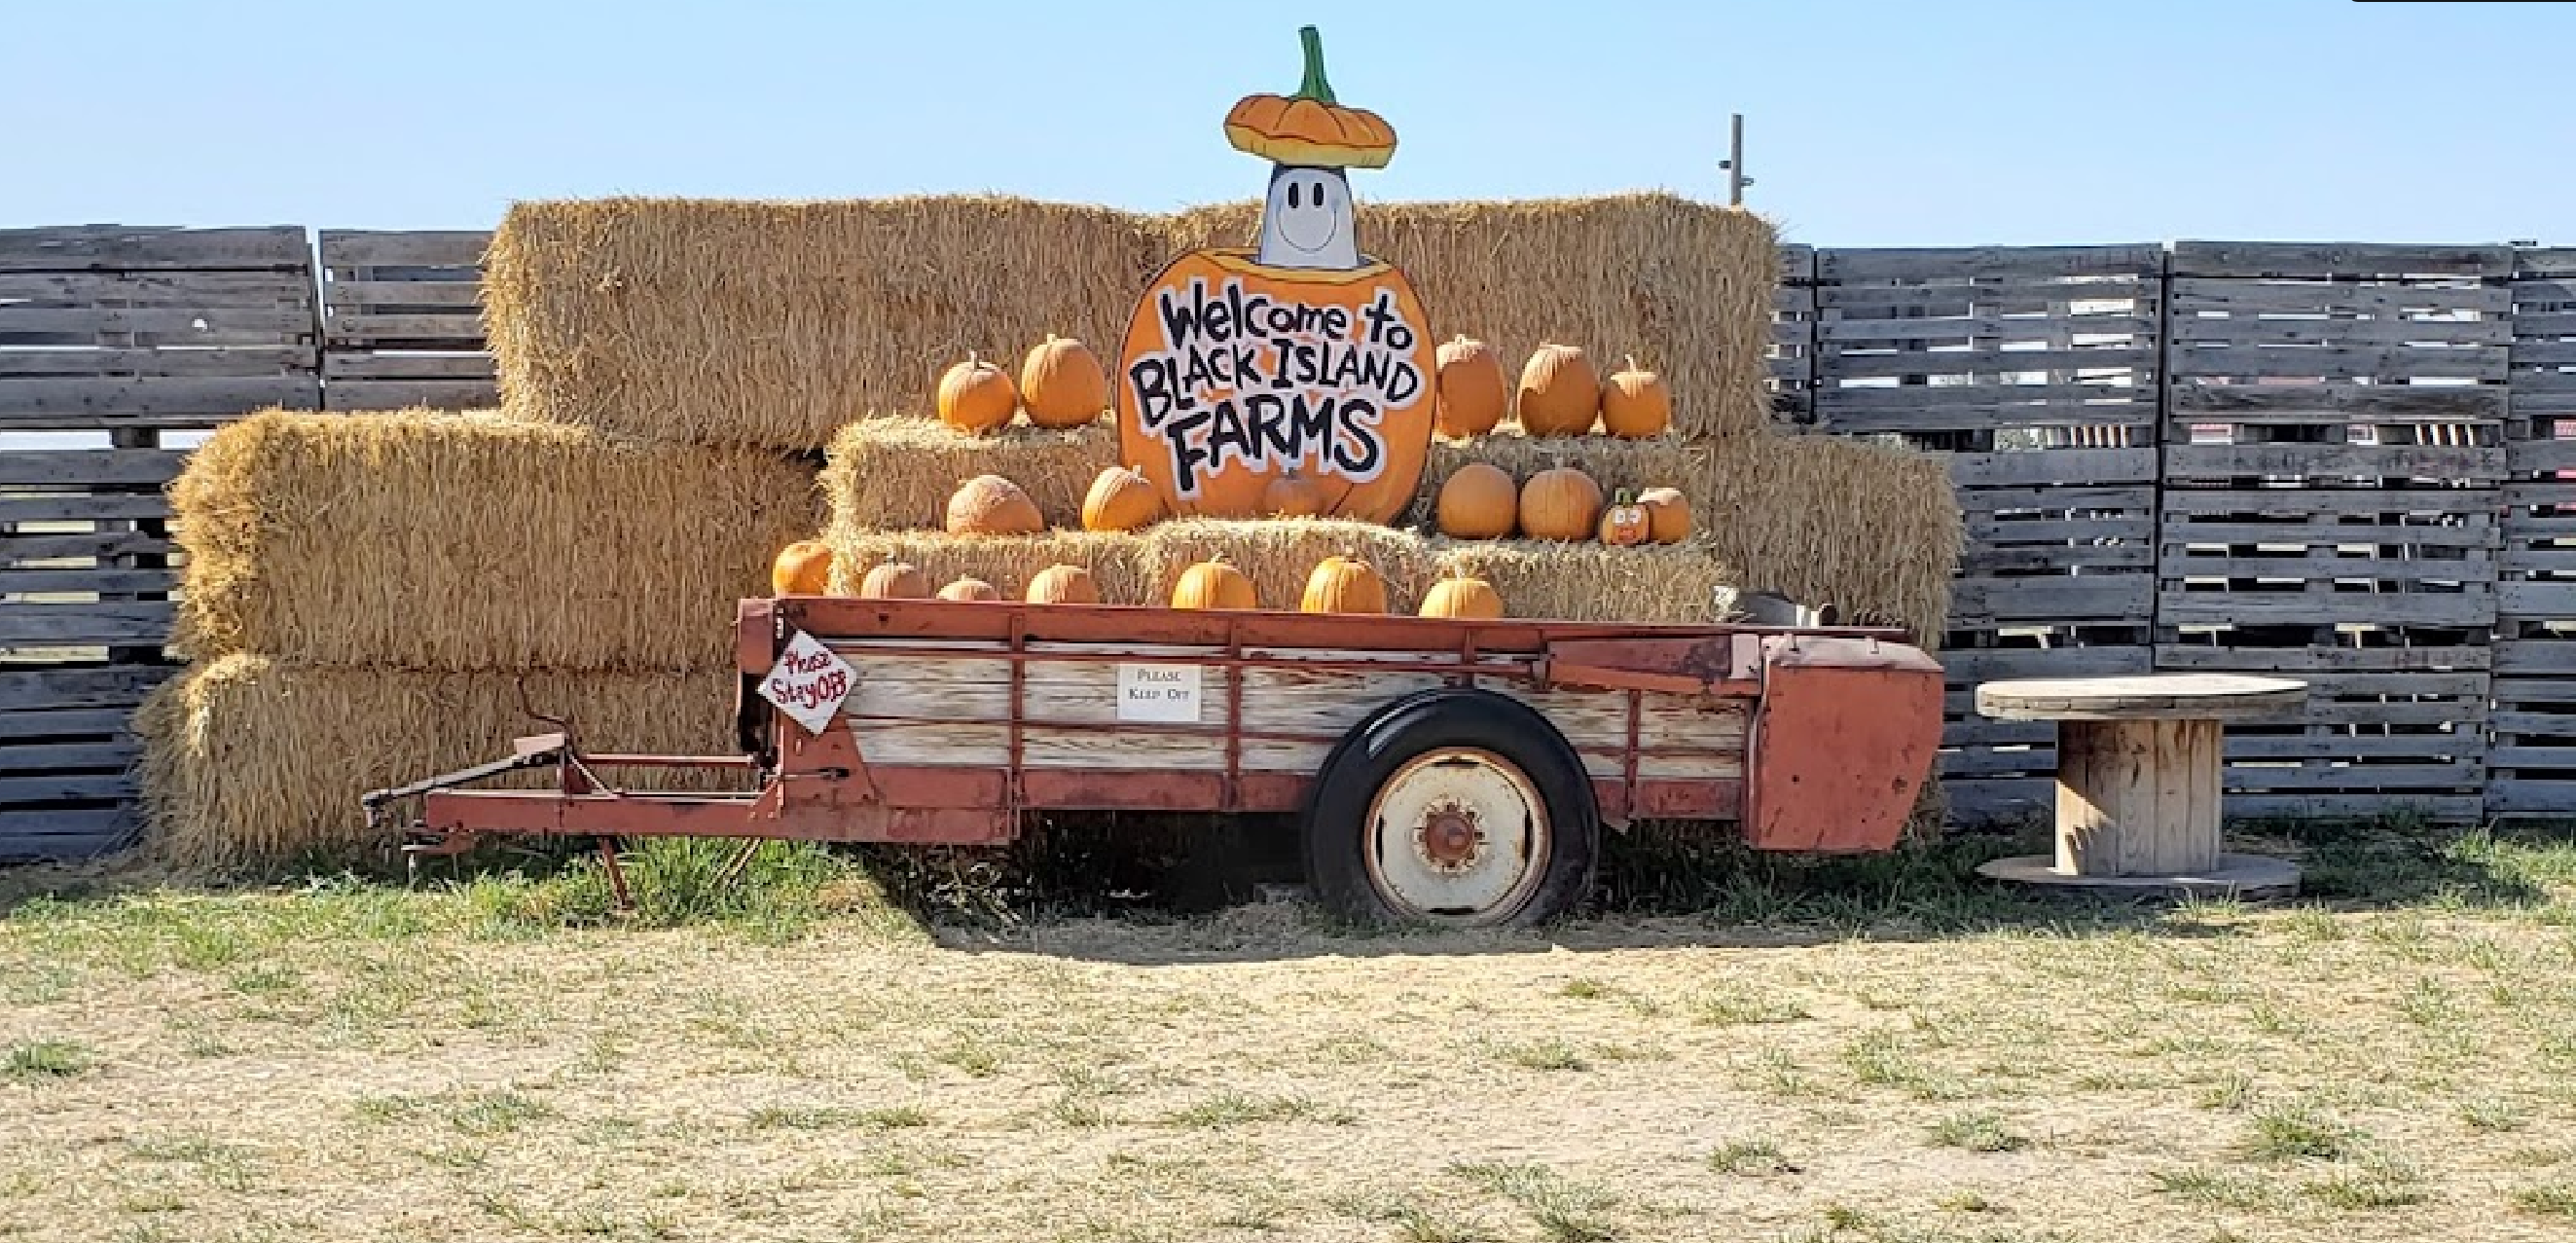 Trailer with hay bales and pumpkins on deck, and a welcome sign